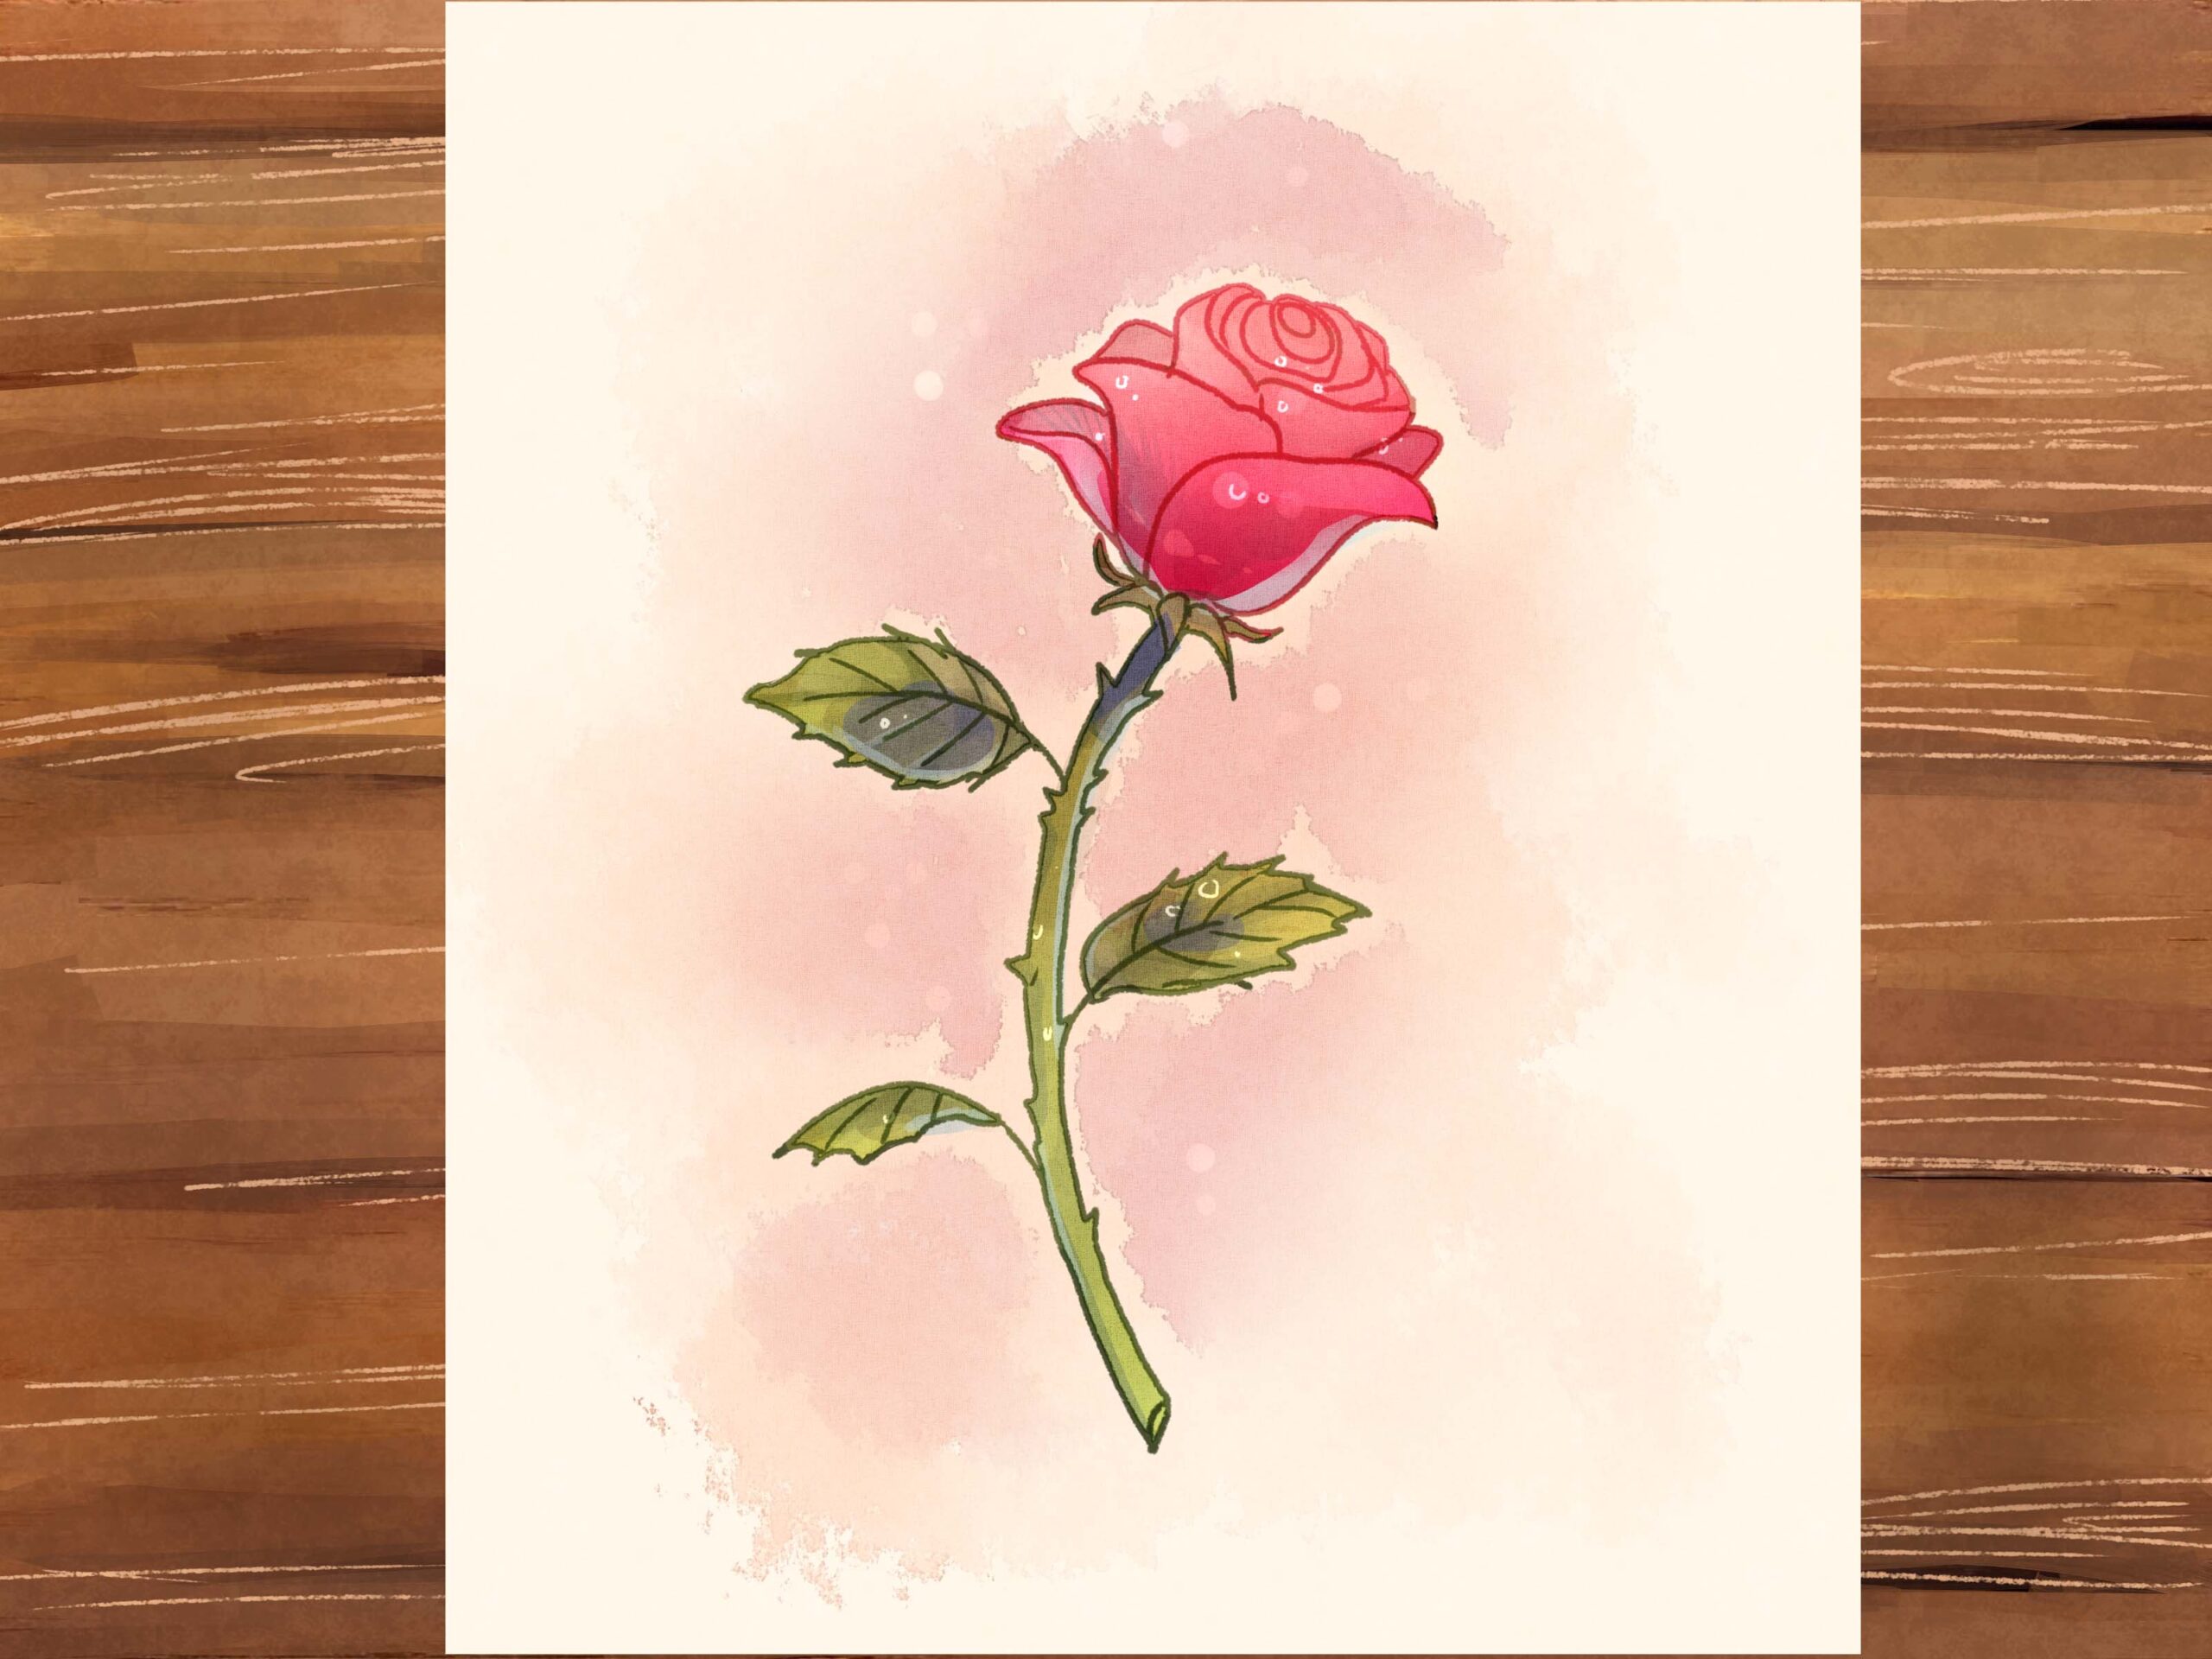 How to draw a rose - learn to draw a rose easy and step by step with this video tutorial. Watch and practice your drawing. Come on!